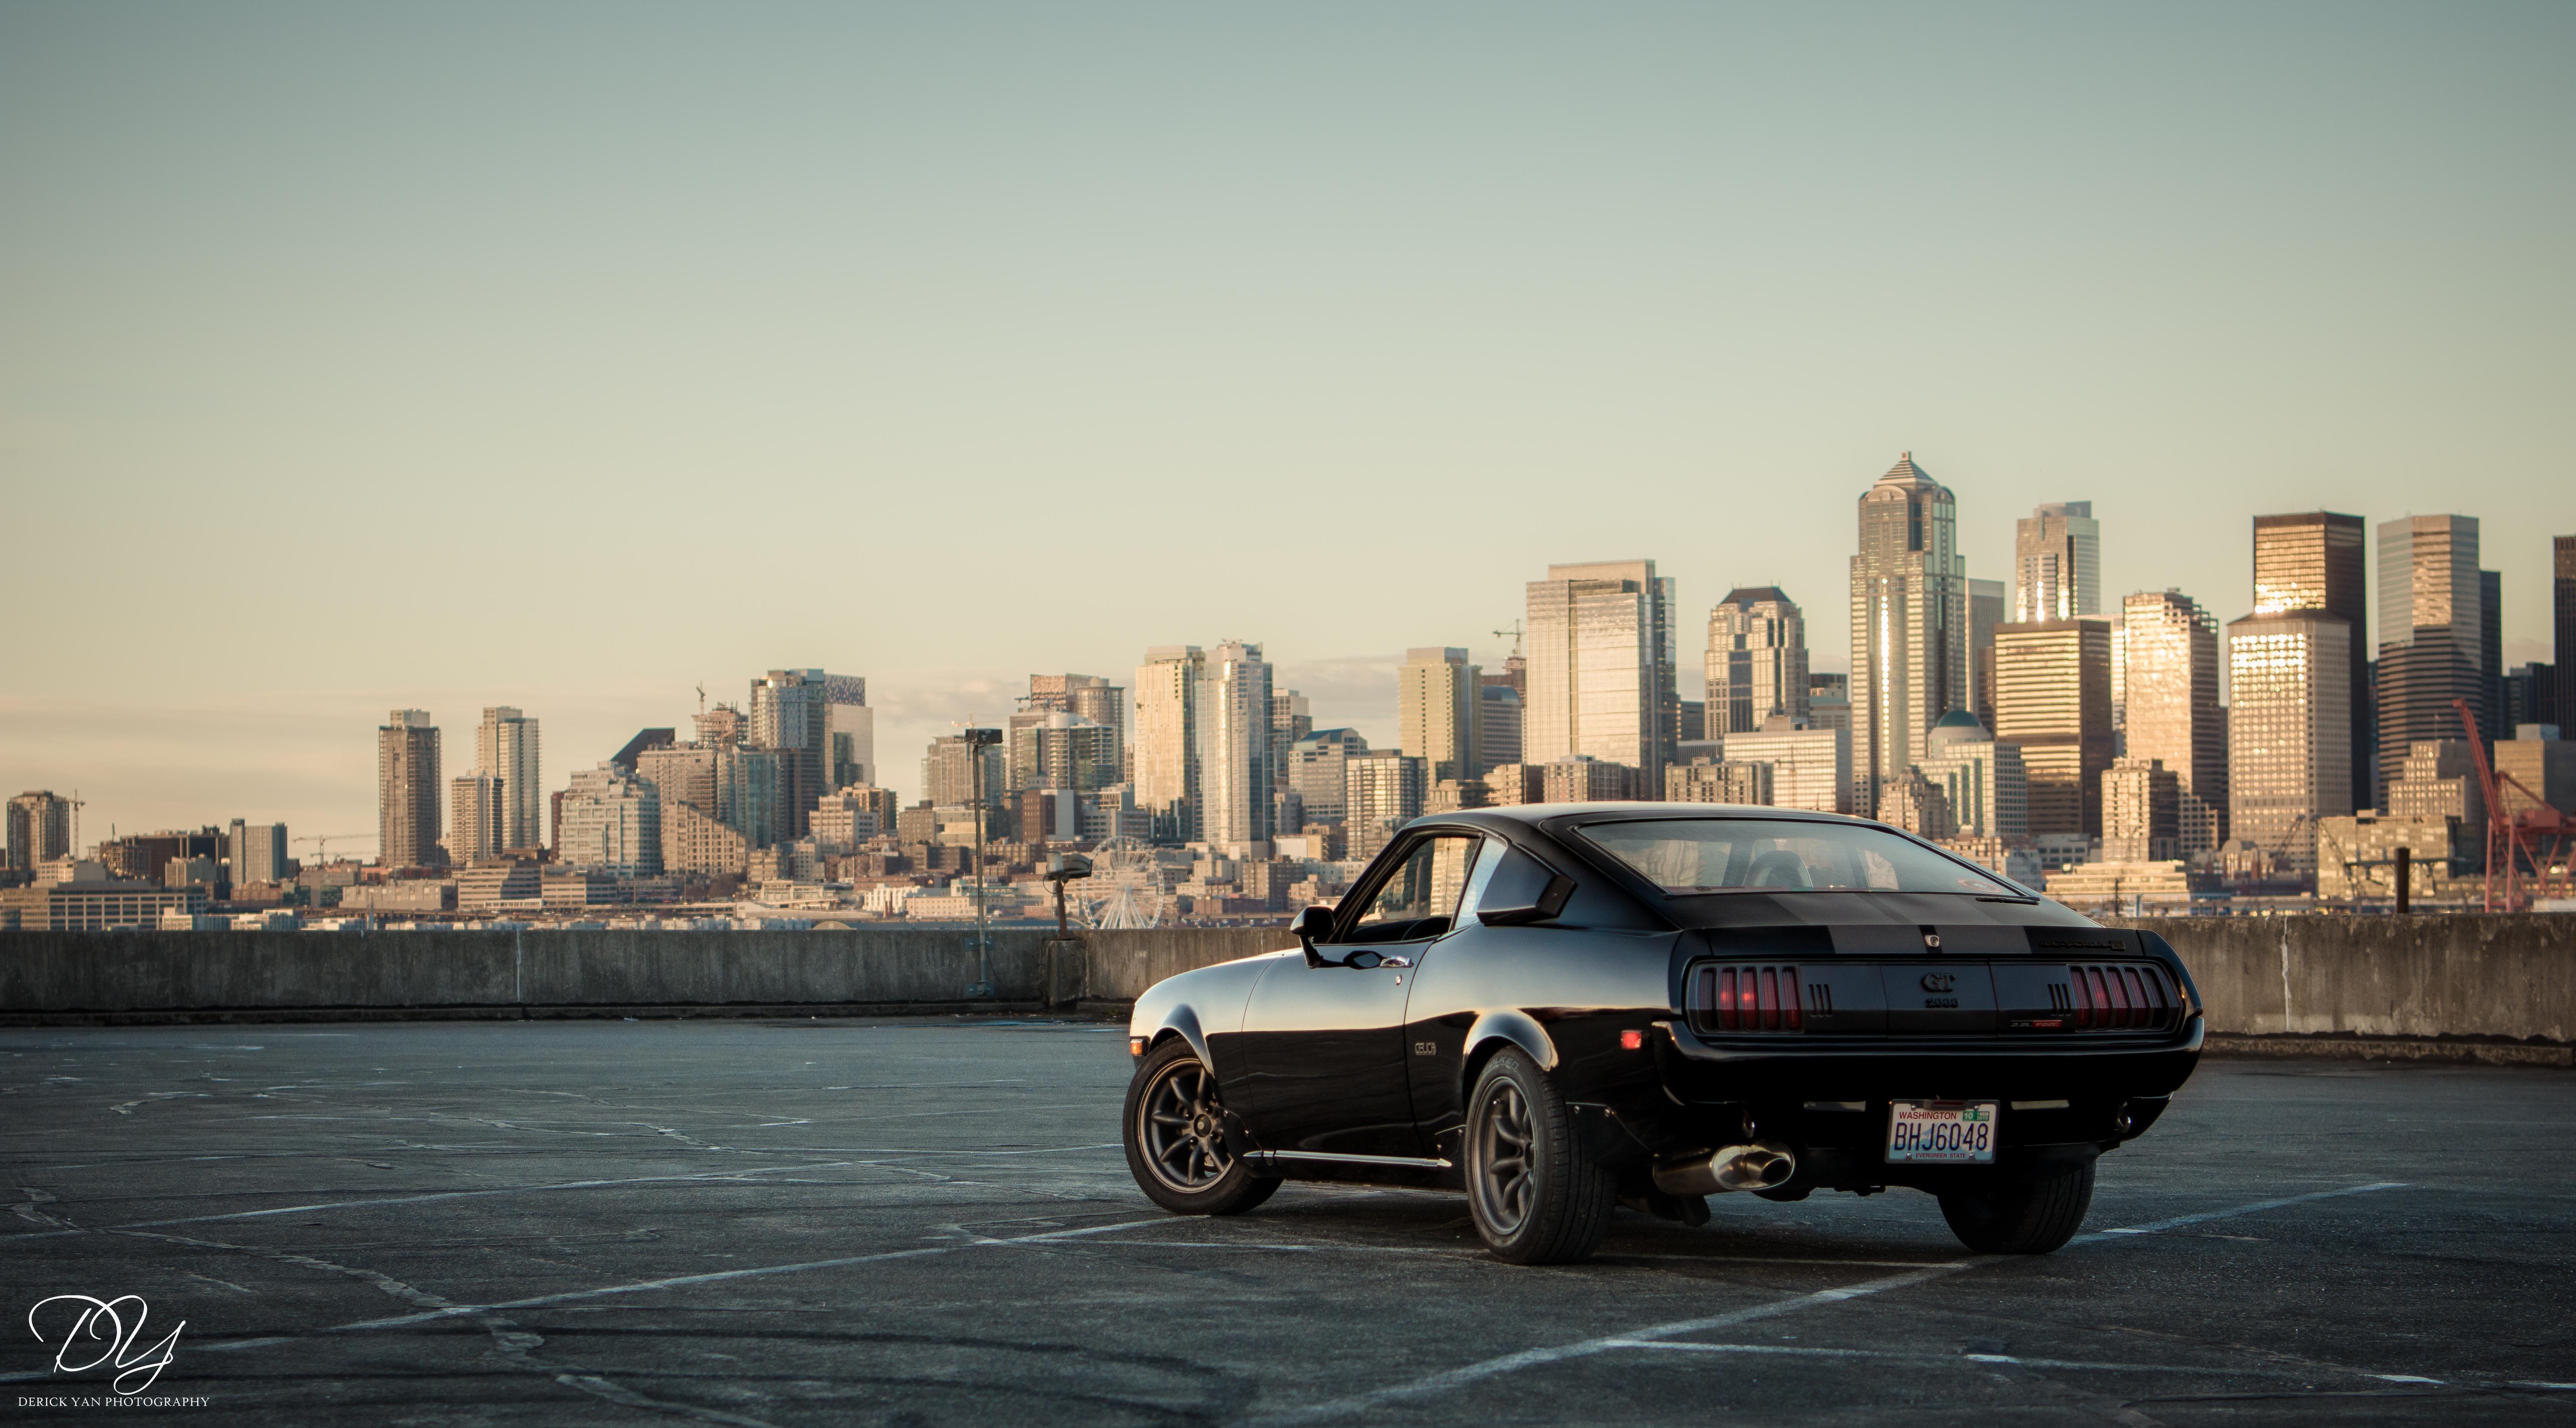 Your Ridiculously Awesome Toyota Celica Wallpaper Is Here